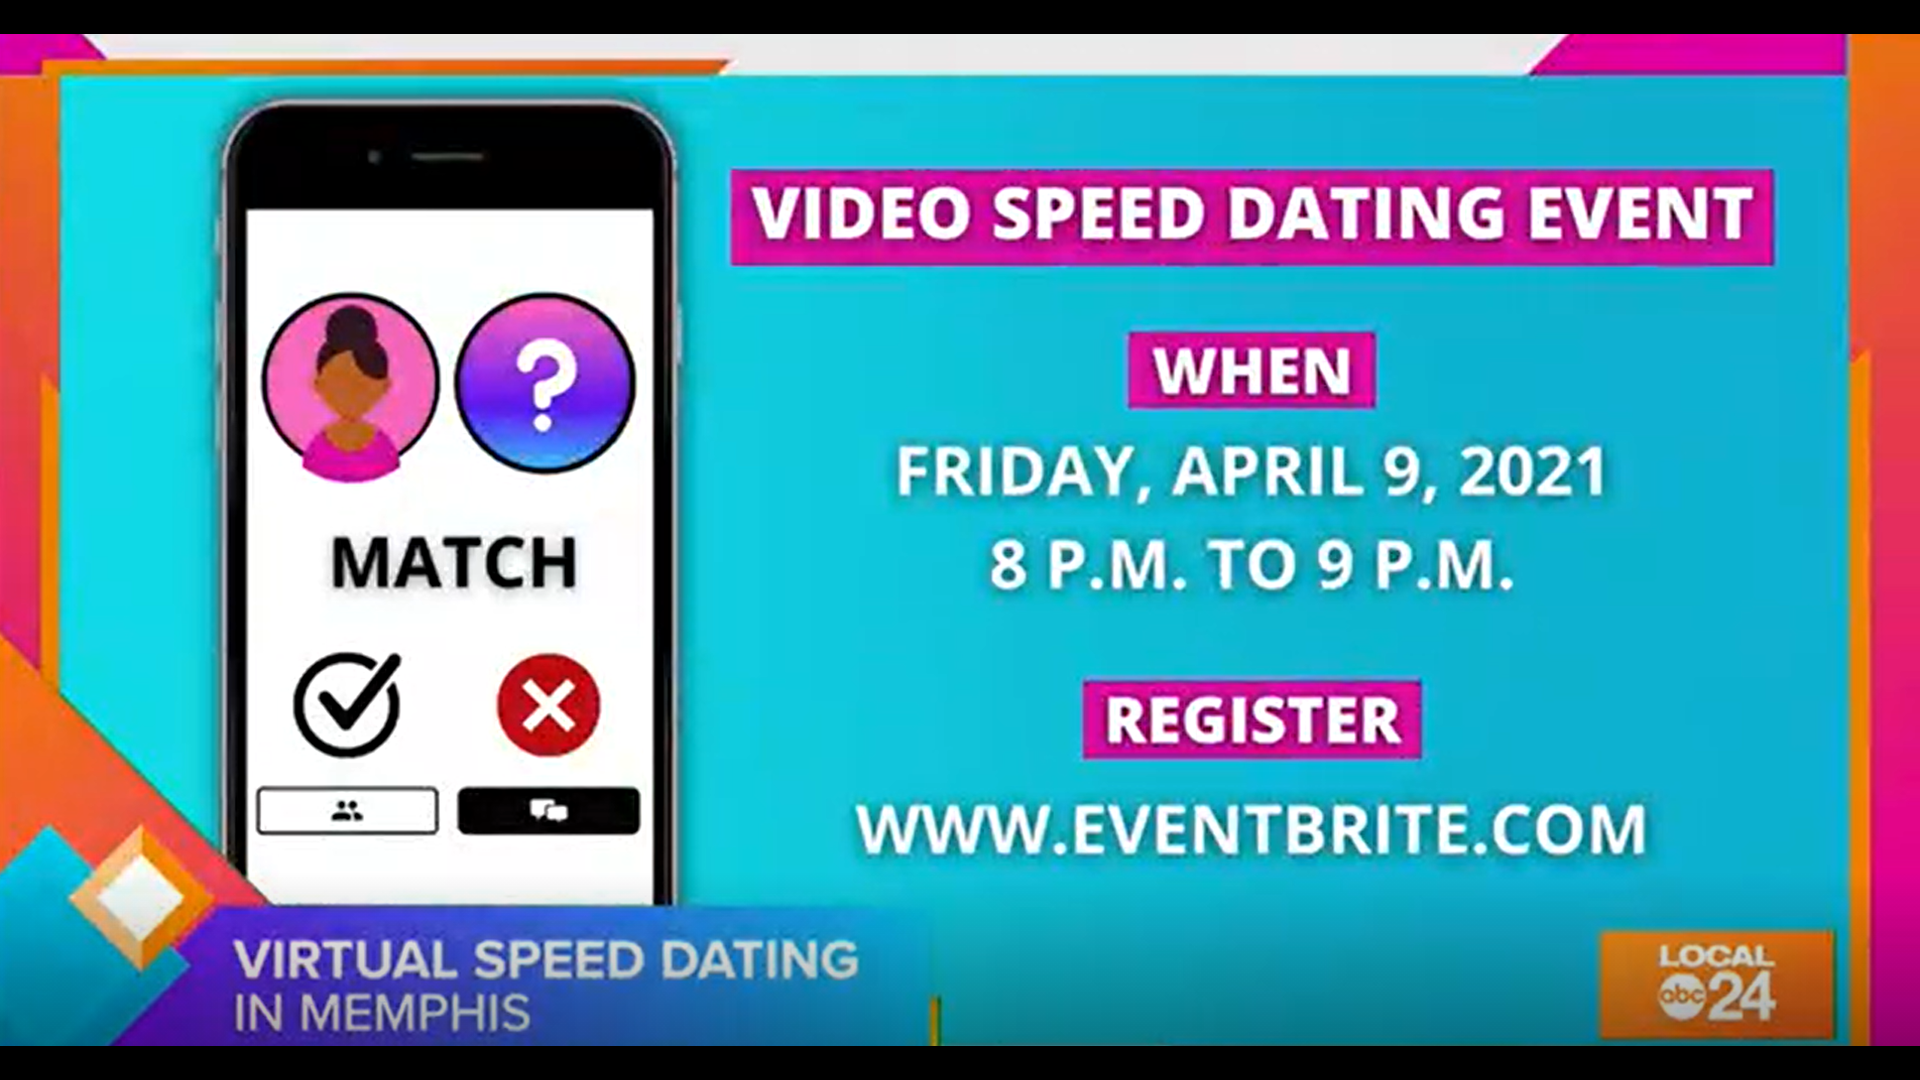 Still looking for "the one" in Memphis? In that case, check out this virtual speed dating event on Eventbrite! Starring Sydney Neely on "The Shortcut!" :)